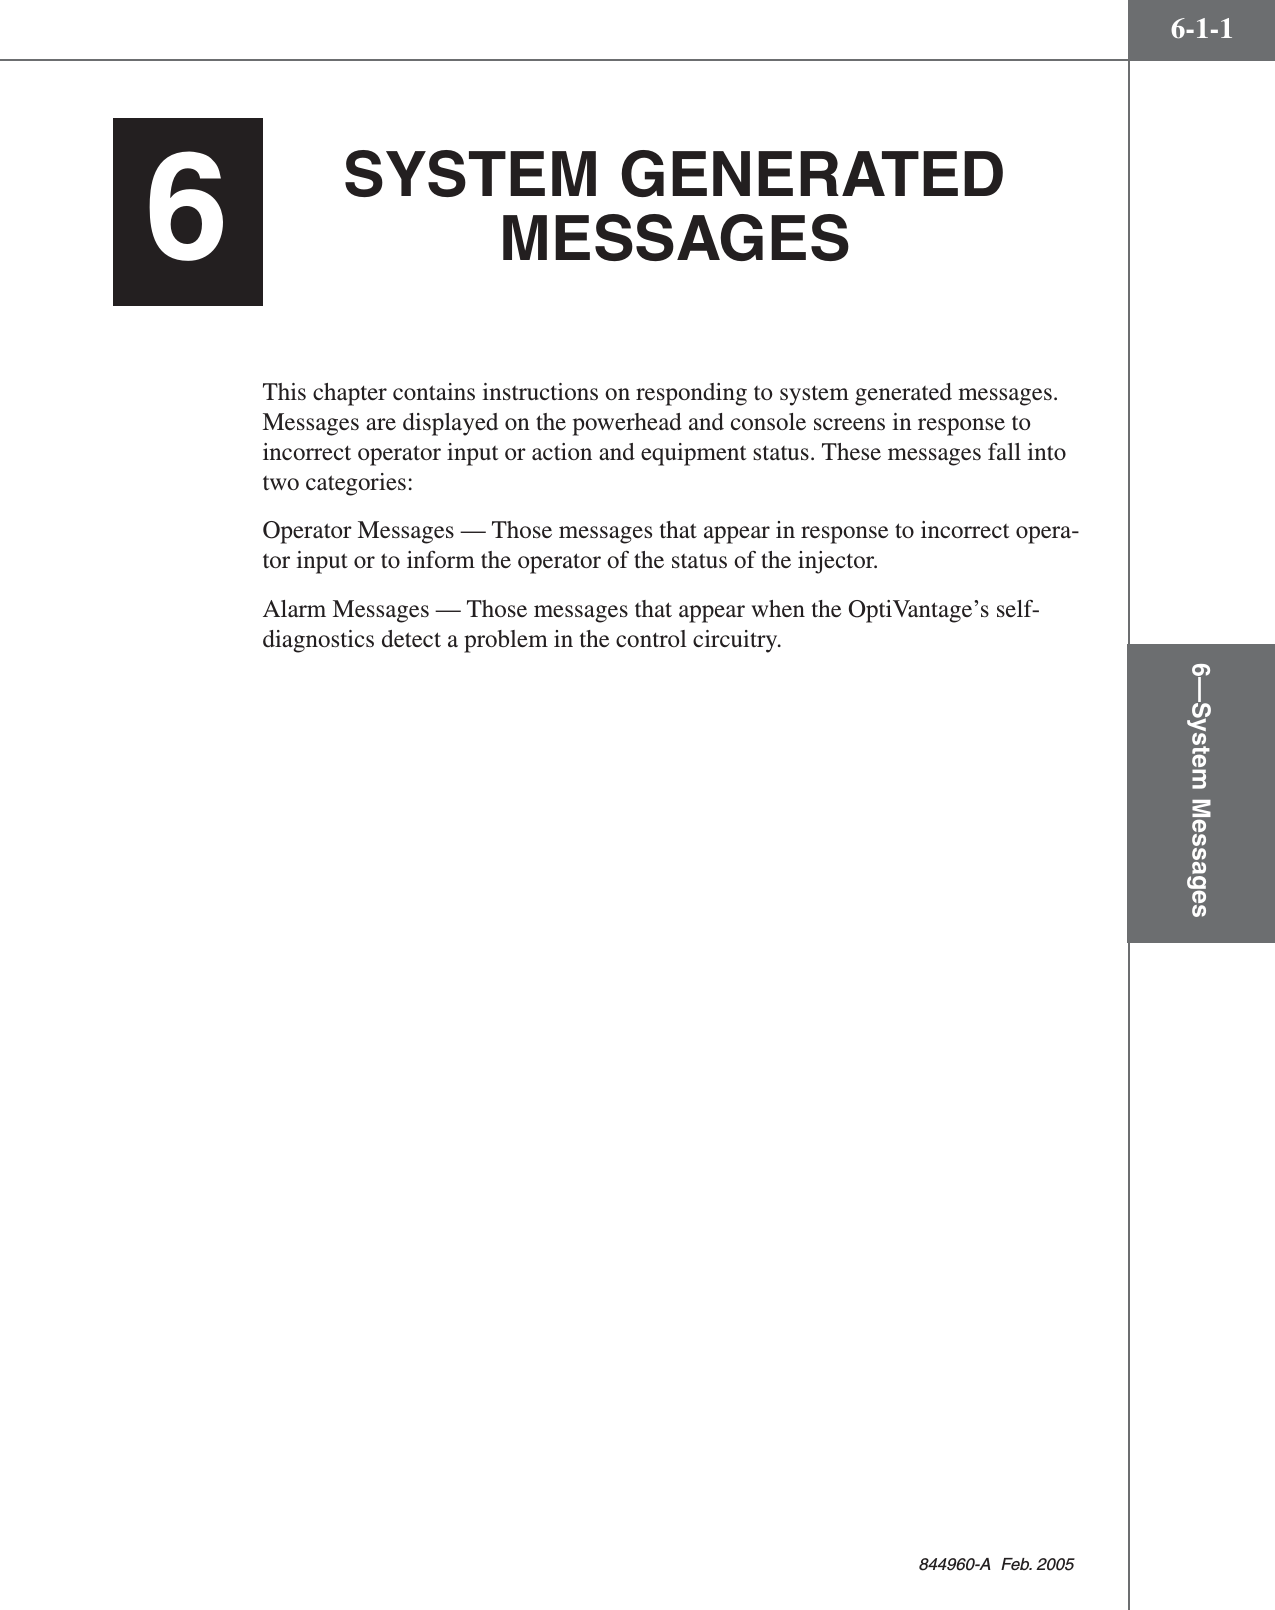 6—System Messages6-1-1844960-A  Feb. 2005SYSTEM GENERATEDMESSAGESThis chapter contains instructions on responding to system generated messages.Messages are displayed on the powerhead and console screens in response toincorrect operator input or action and equipment status. These messages fall intotwo categories:Operator Messages — Those messages that appear in response to incorrect opera-tor input or to inform the operator of the status of the injector.Alarm Messages — Those messages that appear when the OptiVantage’s self-diagnostics detect a problem in the control circuitry.6